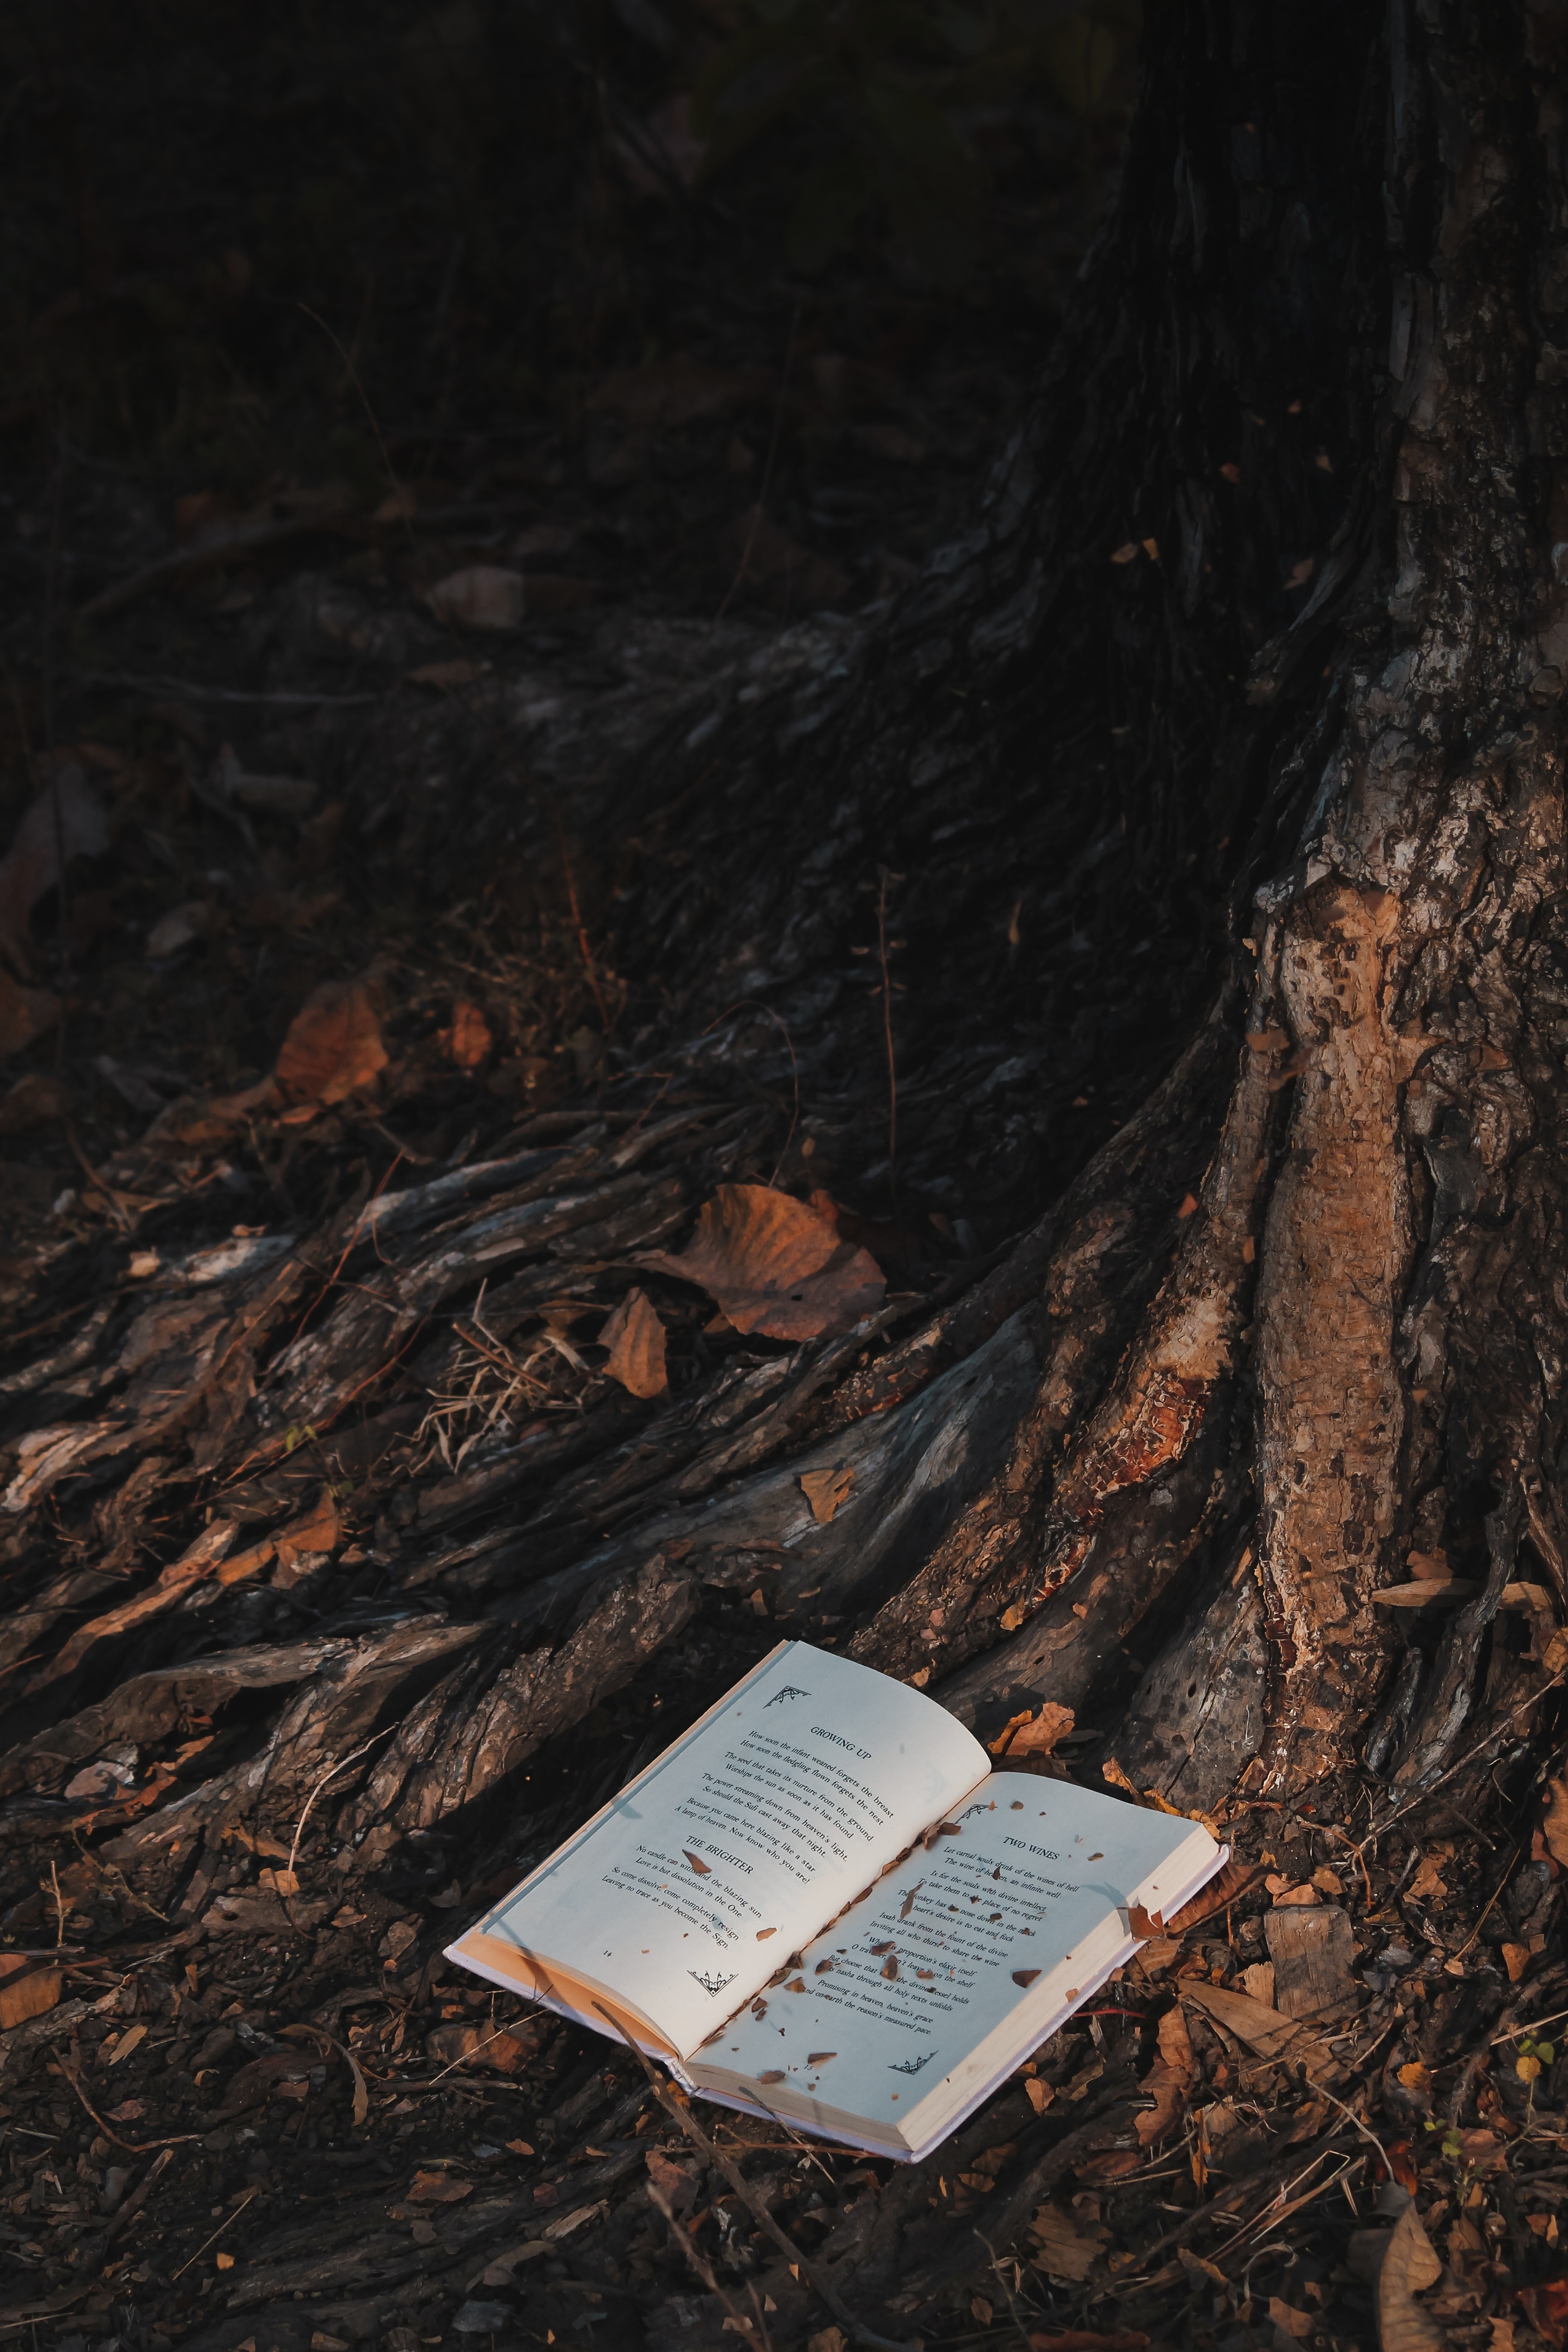 miscellanea, wood, forest, book, miscellaneous, tree UHD